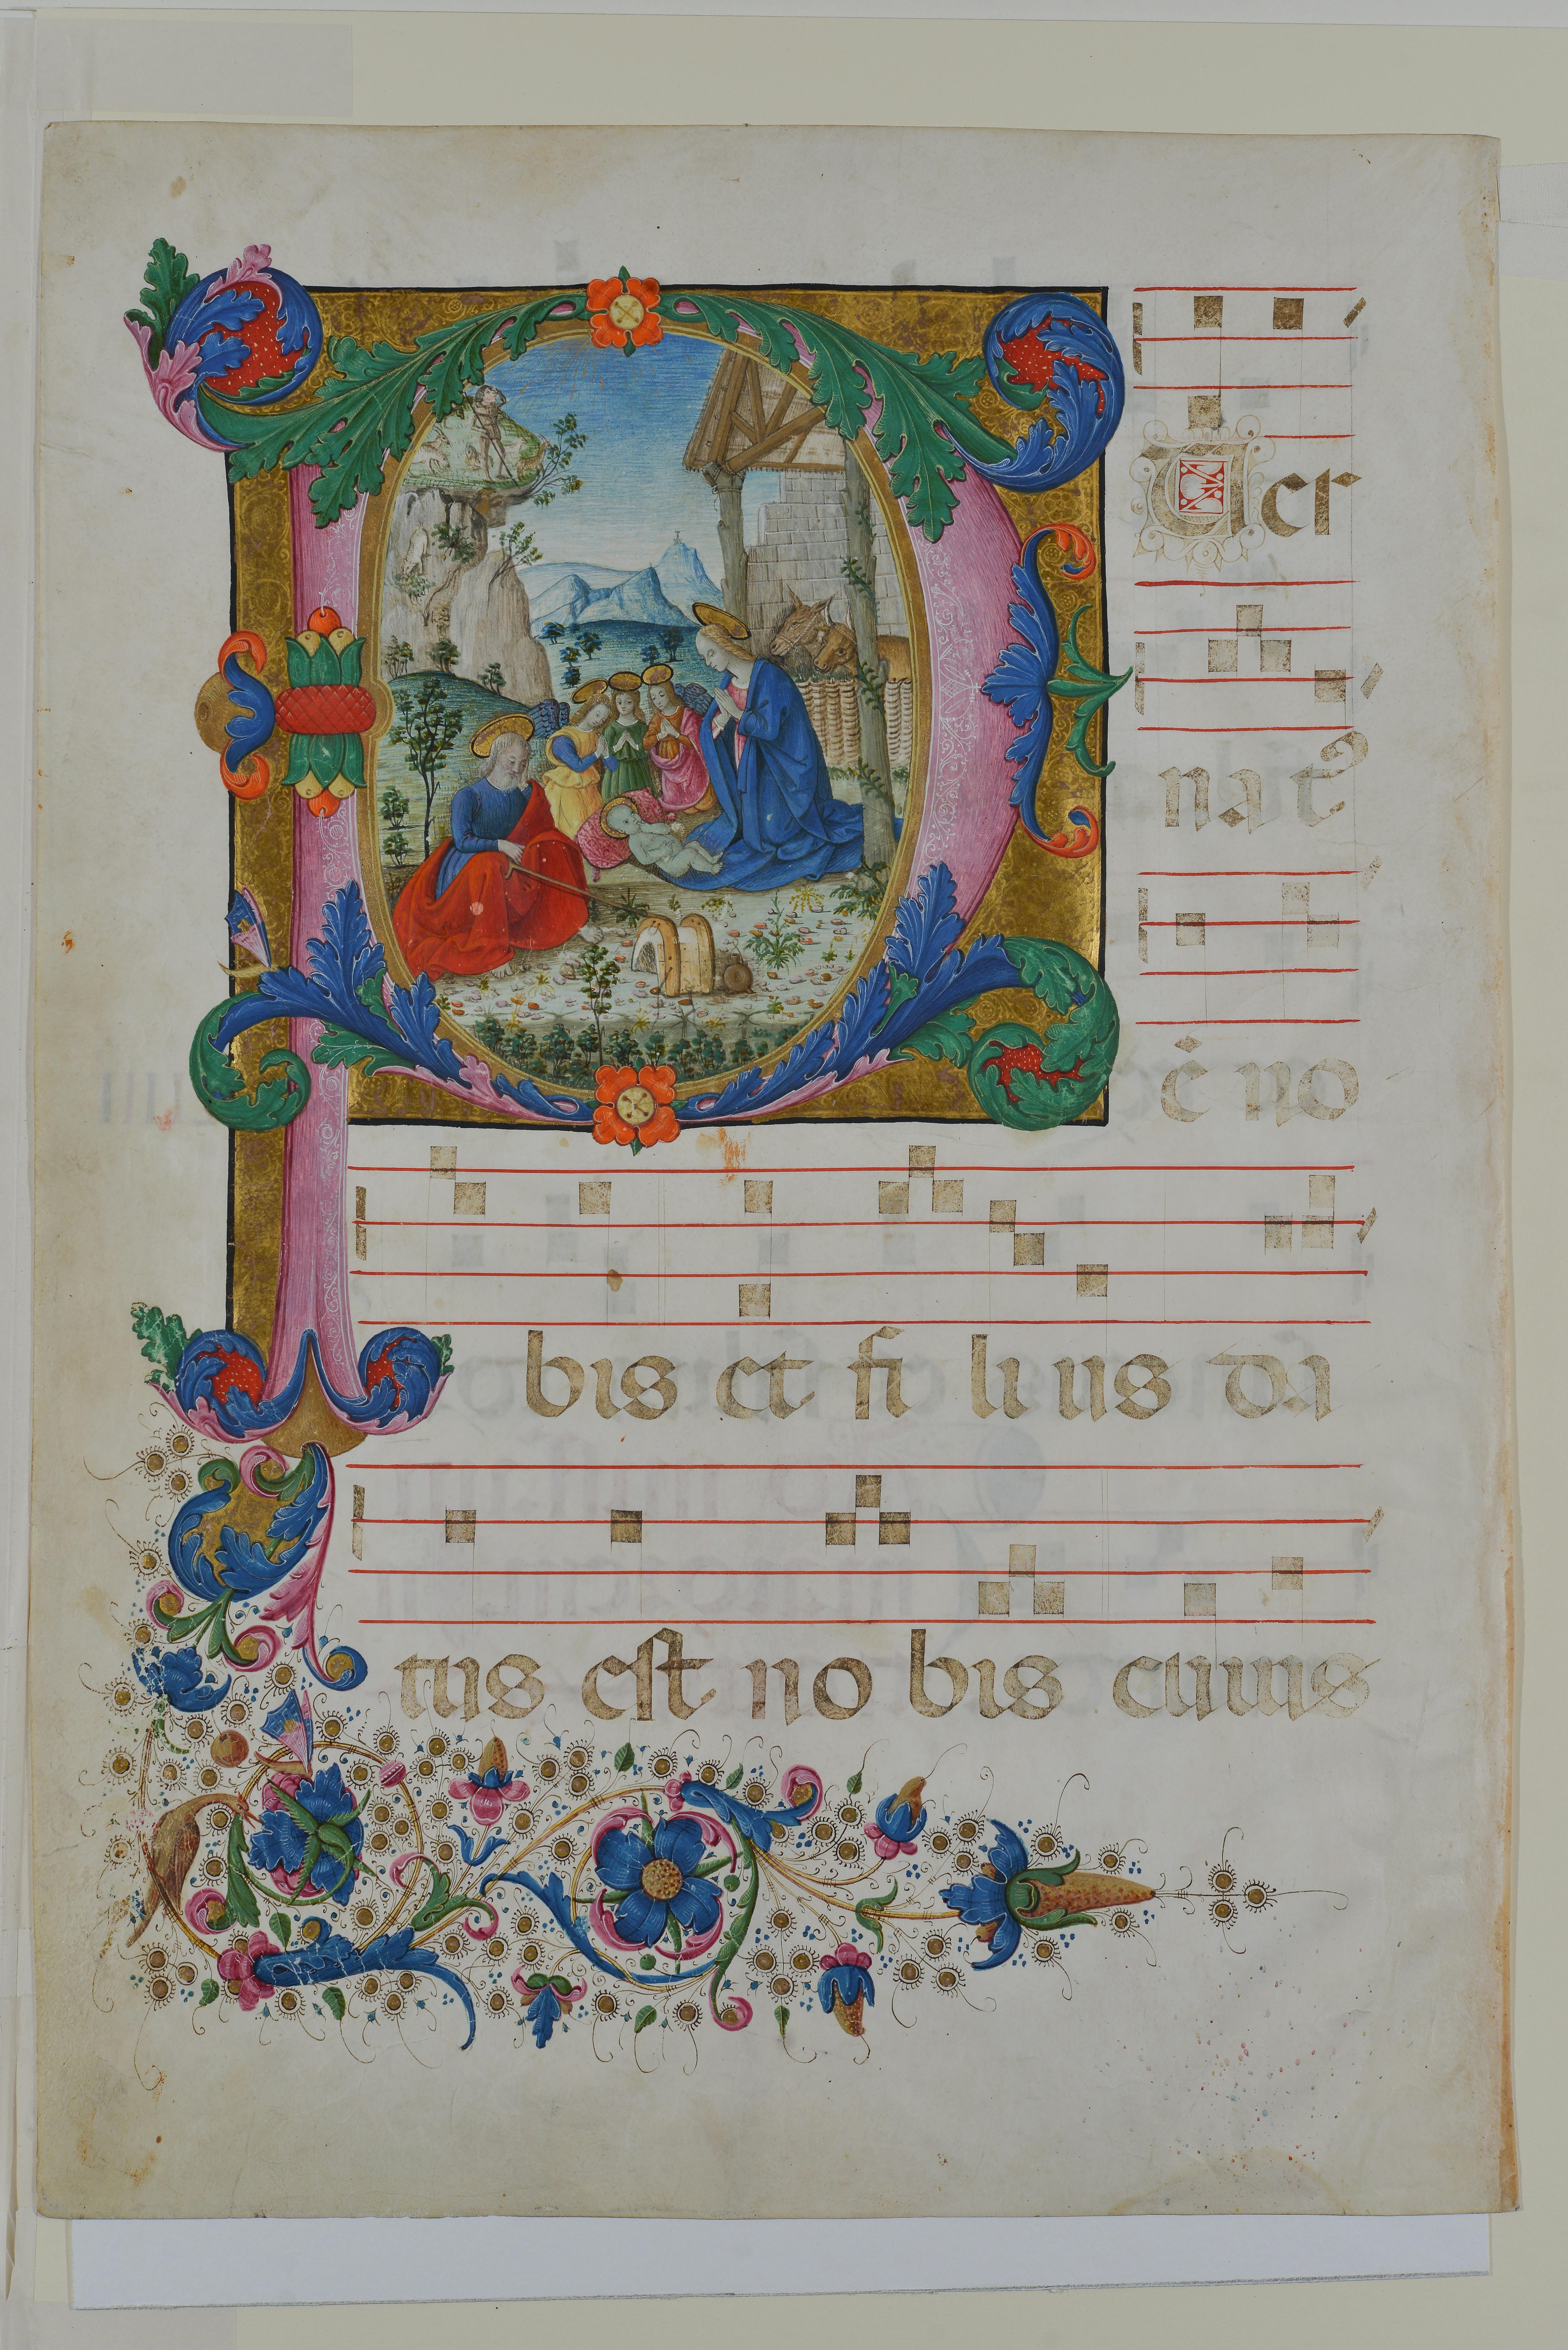 Stories of Painted Pages. Manuscripts and Illuminations Recovered by the Florentine Cultural Heritage Protection Unit